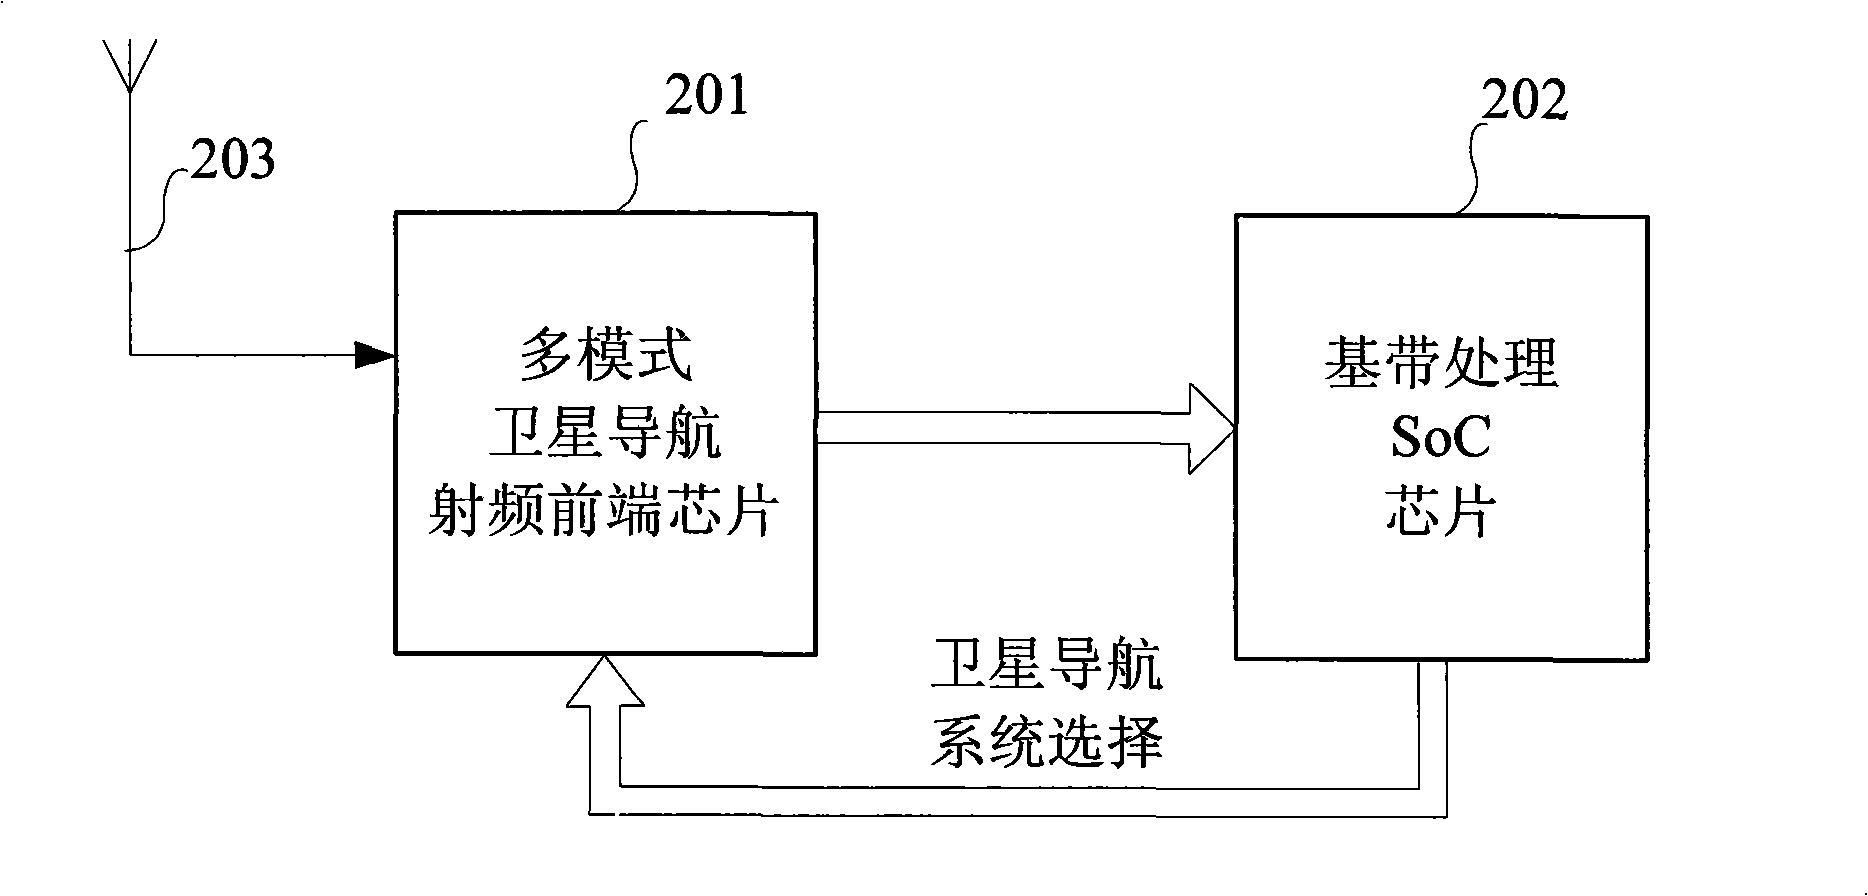 Multi-mode satellite navigation receiving radio frequency front end chip